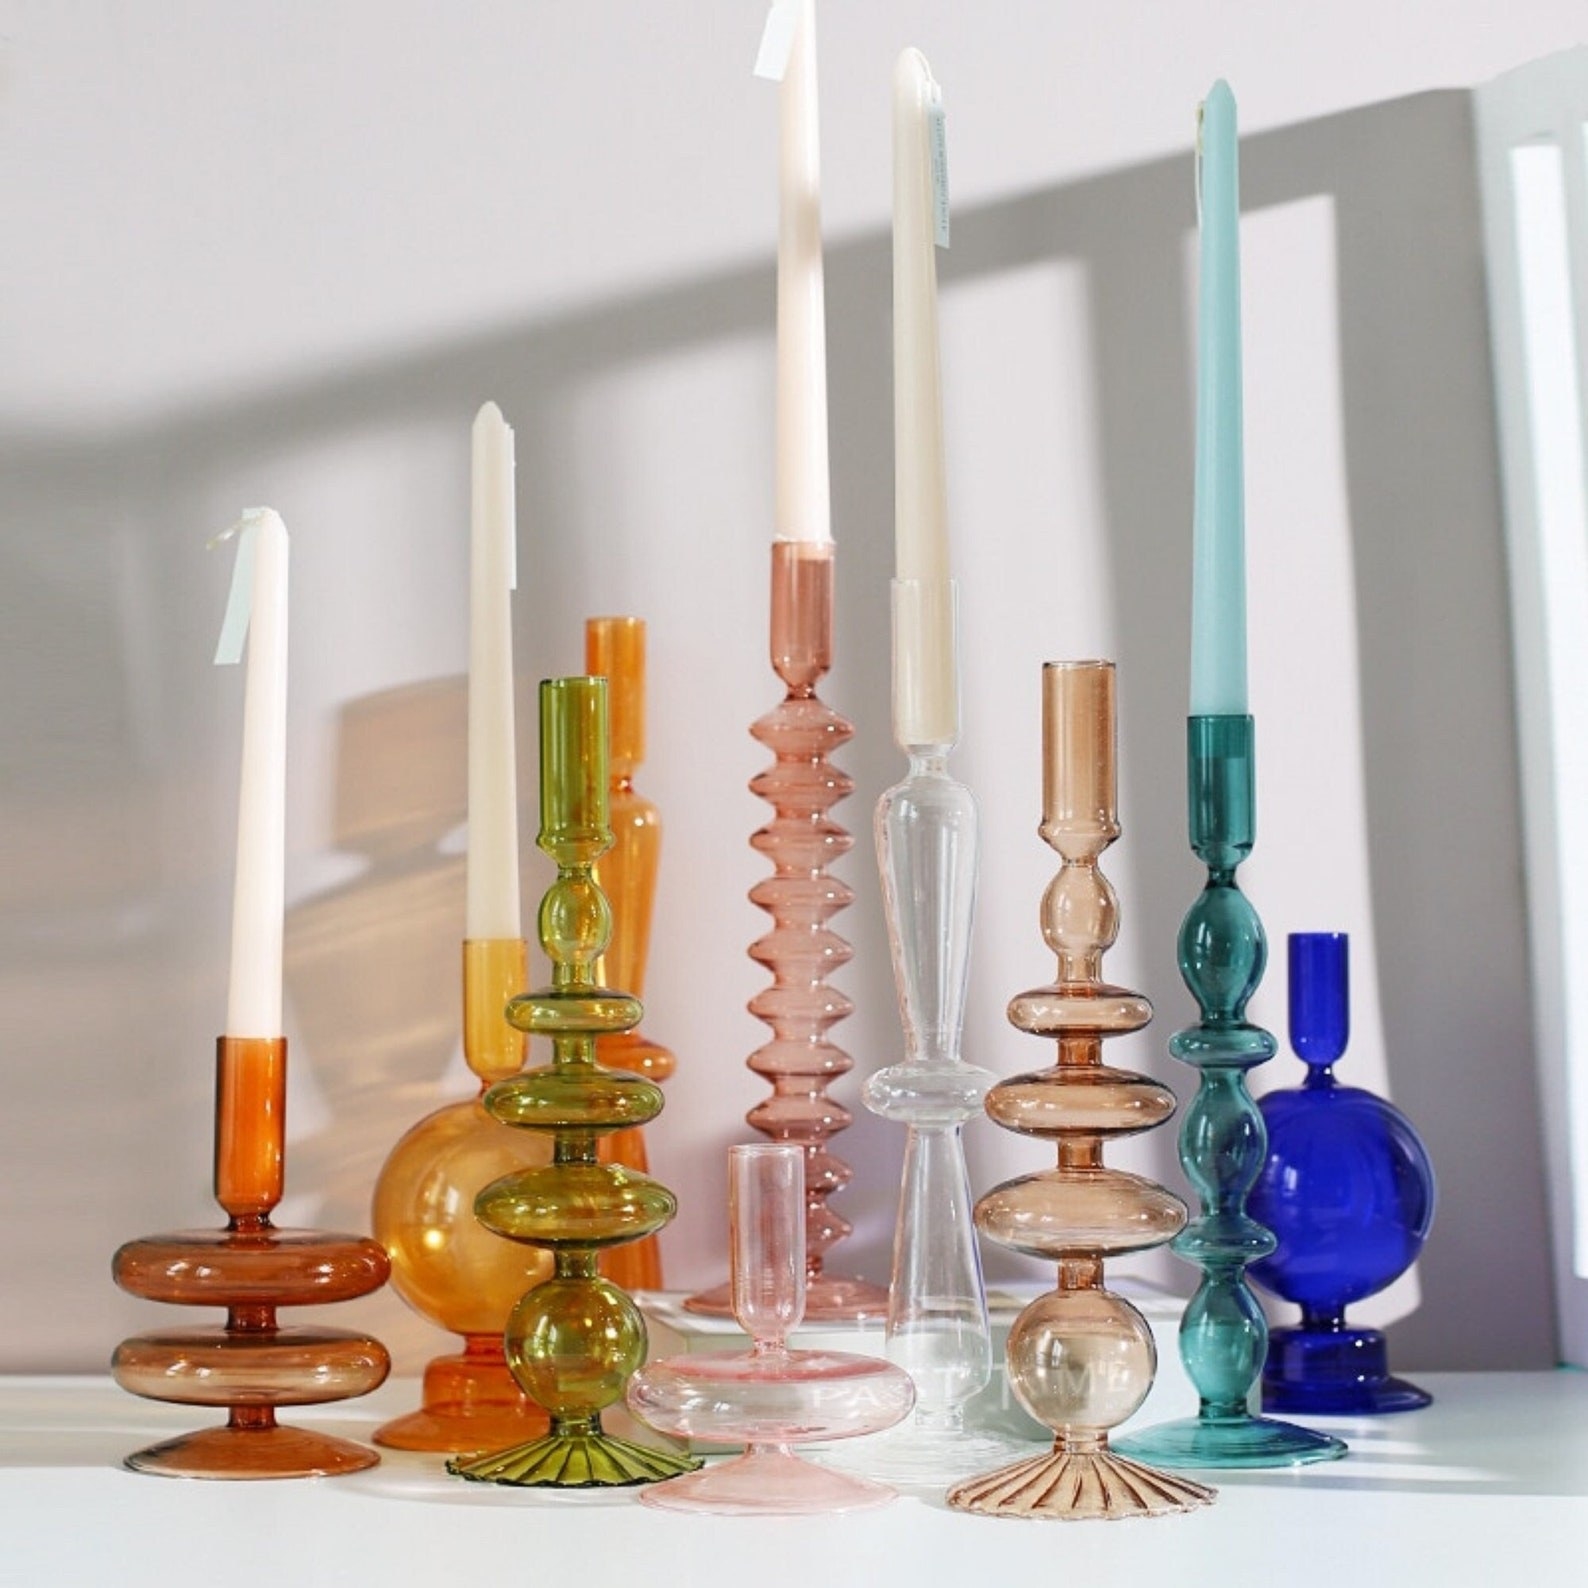 10 different candle holders in various shapes and colors. Five of them are holding white candles.